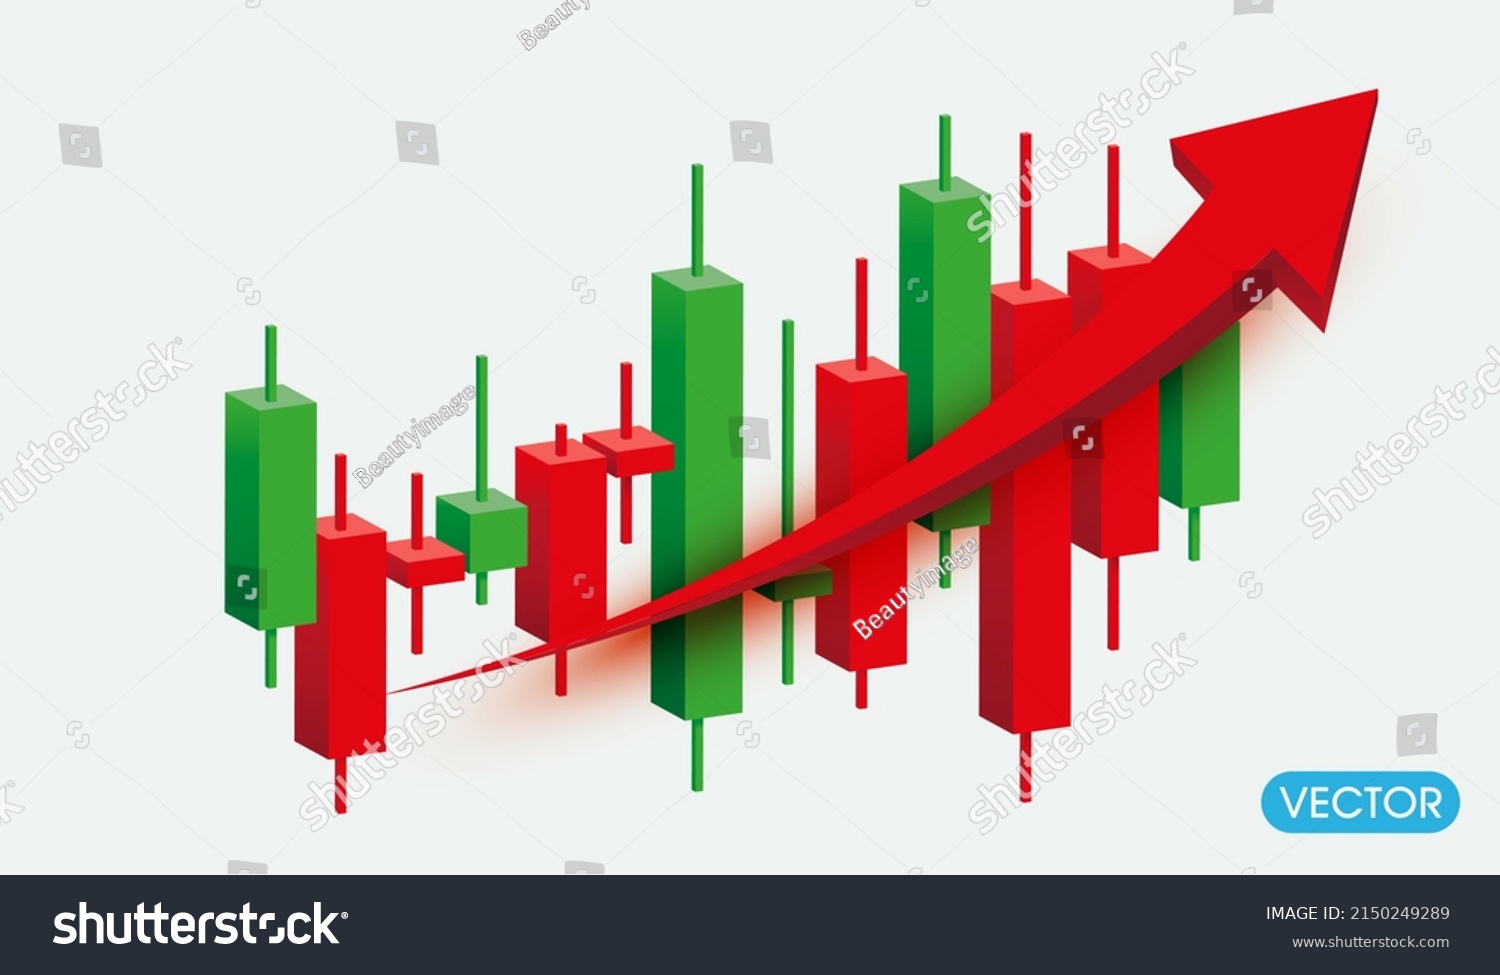 SVG of Growth stock diagram financial graph. candlestick with red arrow up Trading stock or forex 3d icon vector illustration style svg